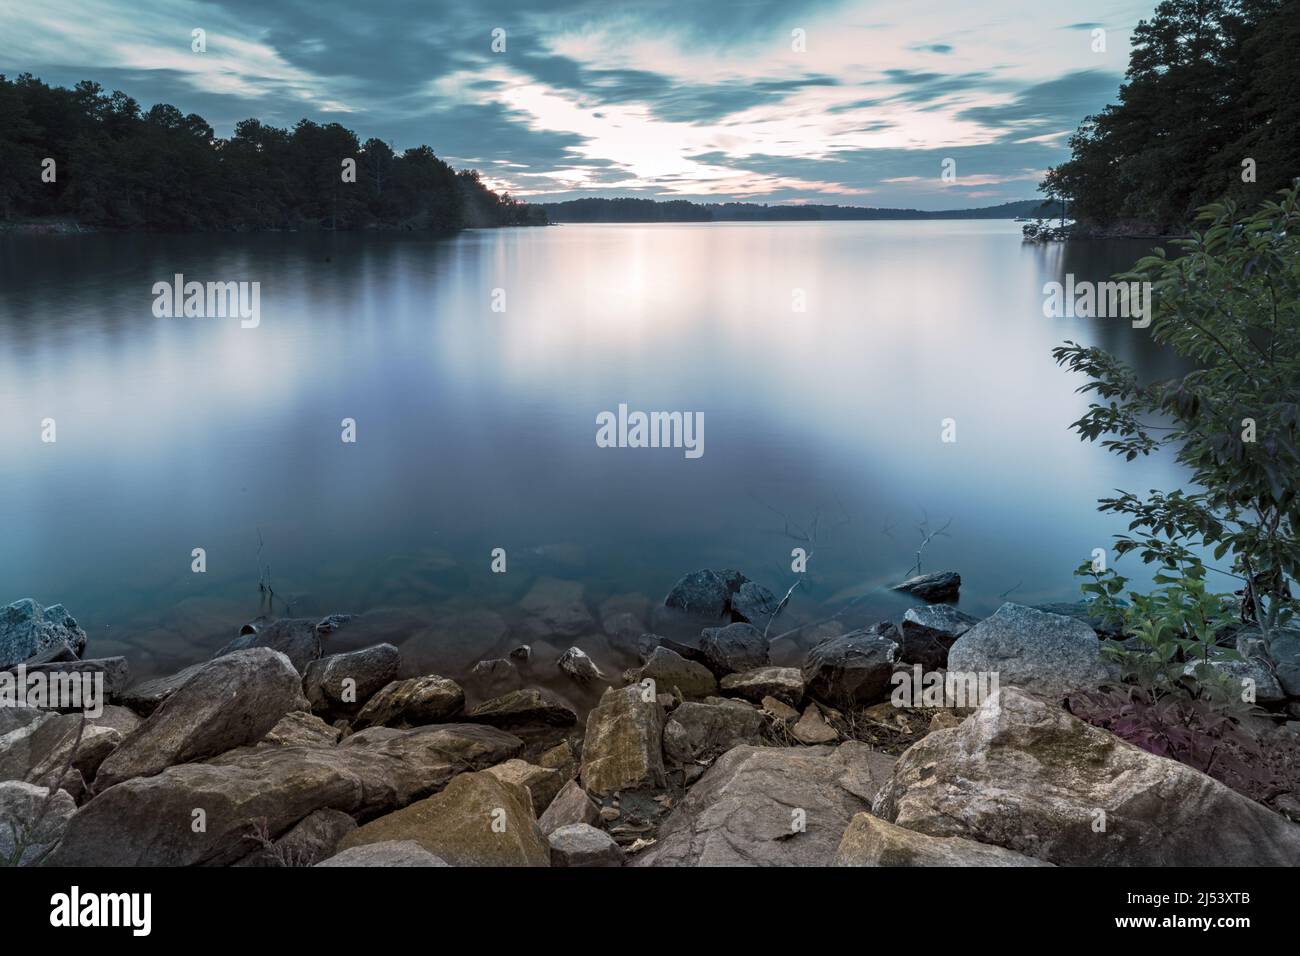 Shore out onto the lake in the evening. Stock Photo